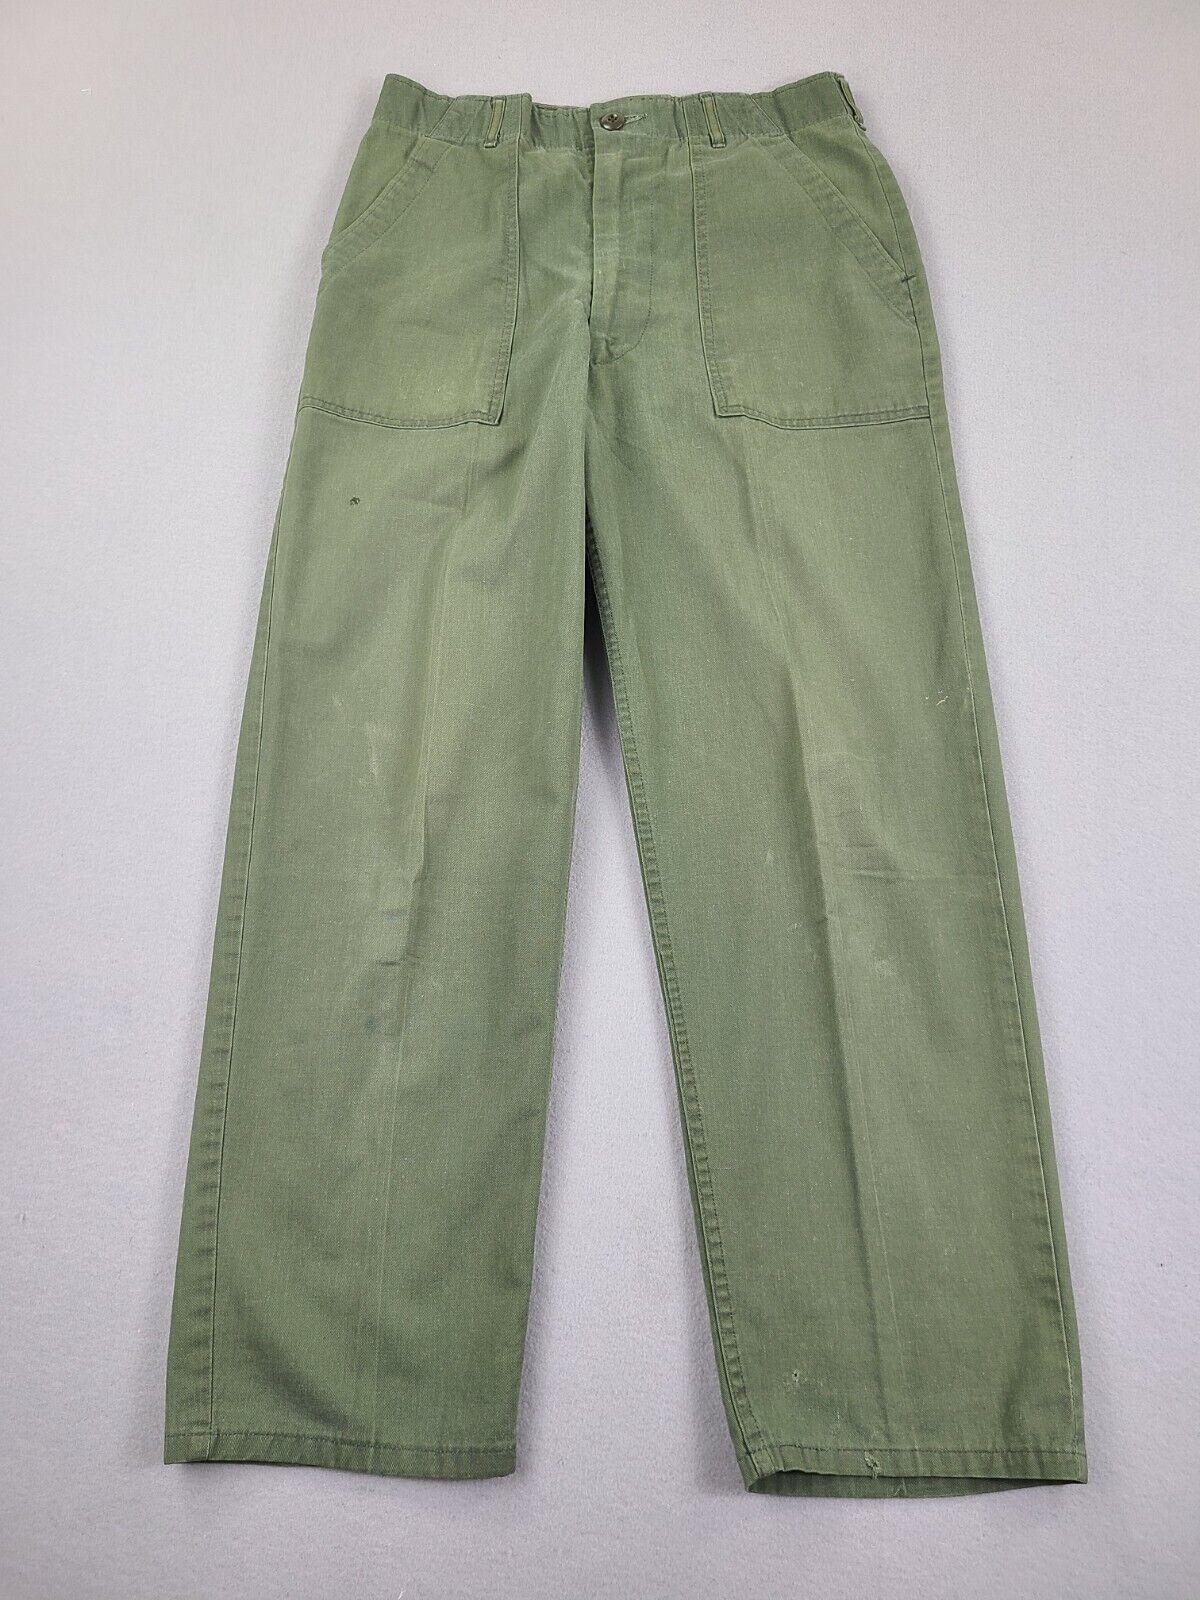 Vintage Army Pants 30x29 OG-107 Army Green Military